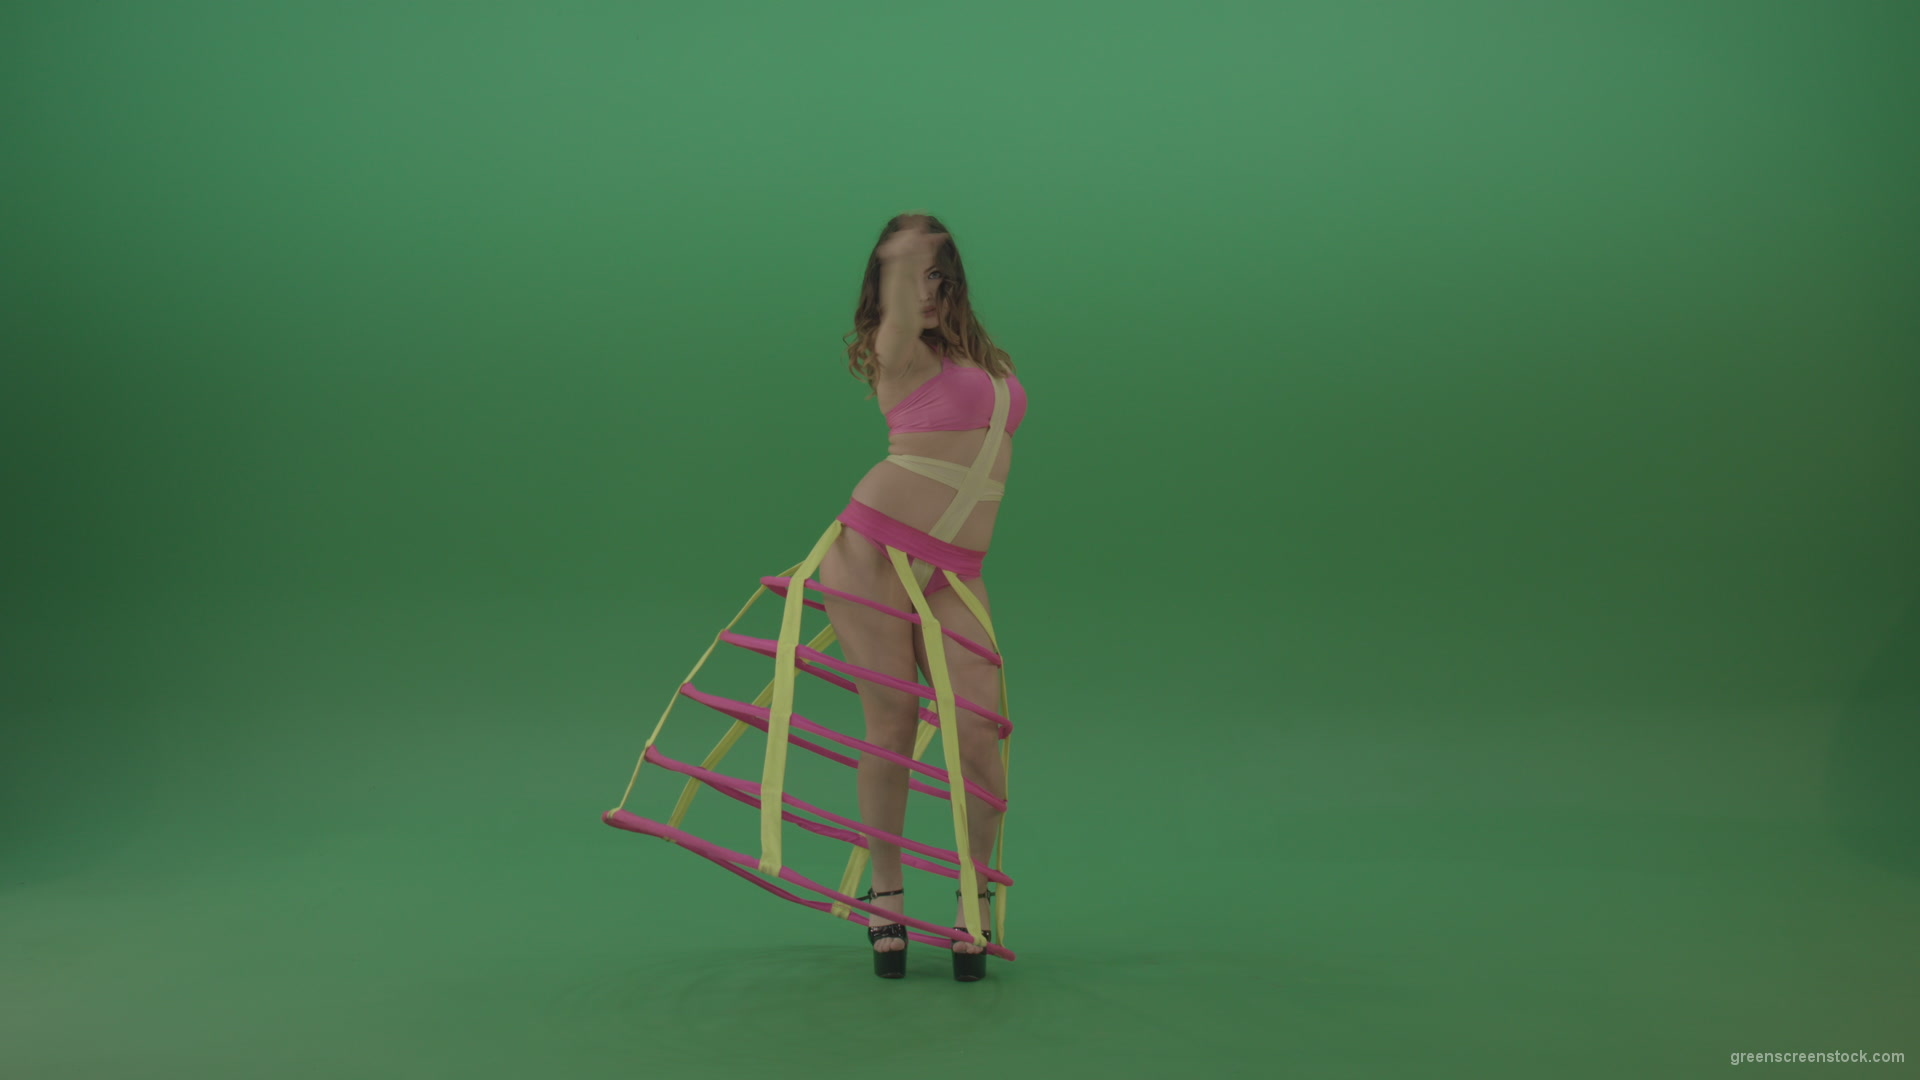 With-a-beautiful-appearance-brunette-in-an-extraordinary-costume-dancing-on-green-screen_005 Green Screen Stock